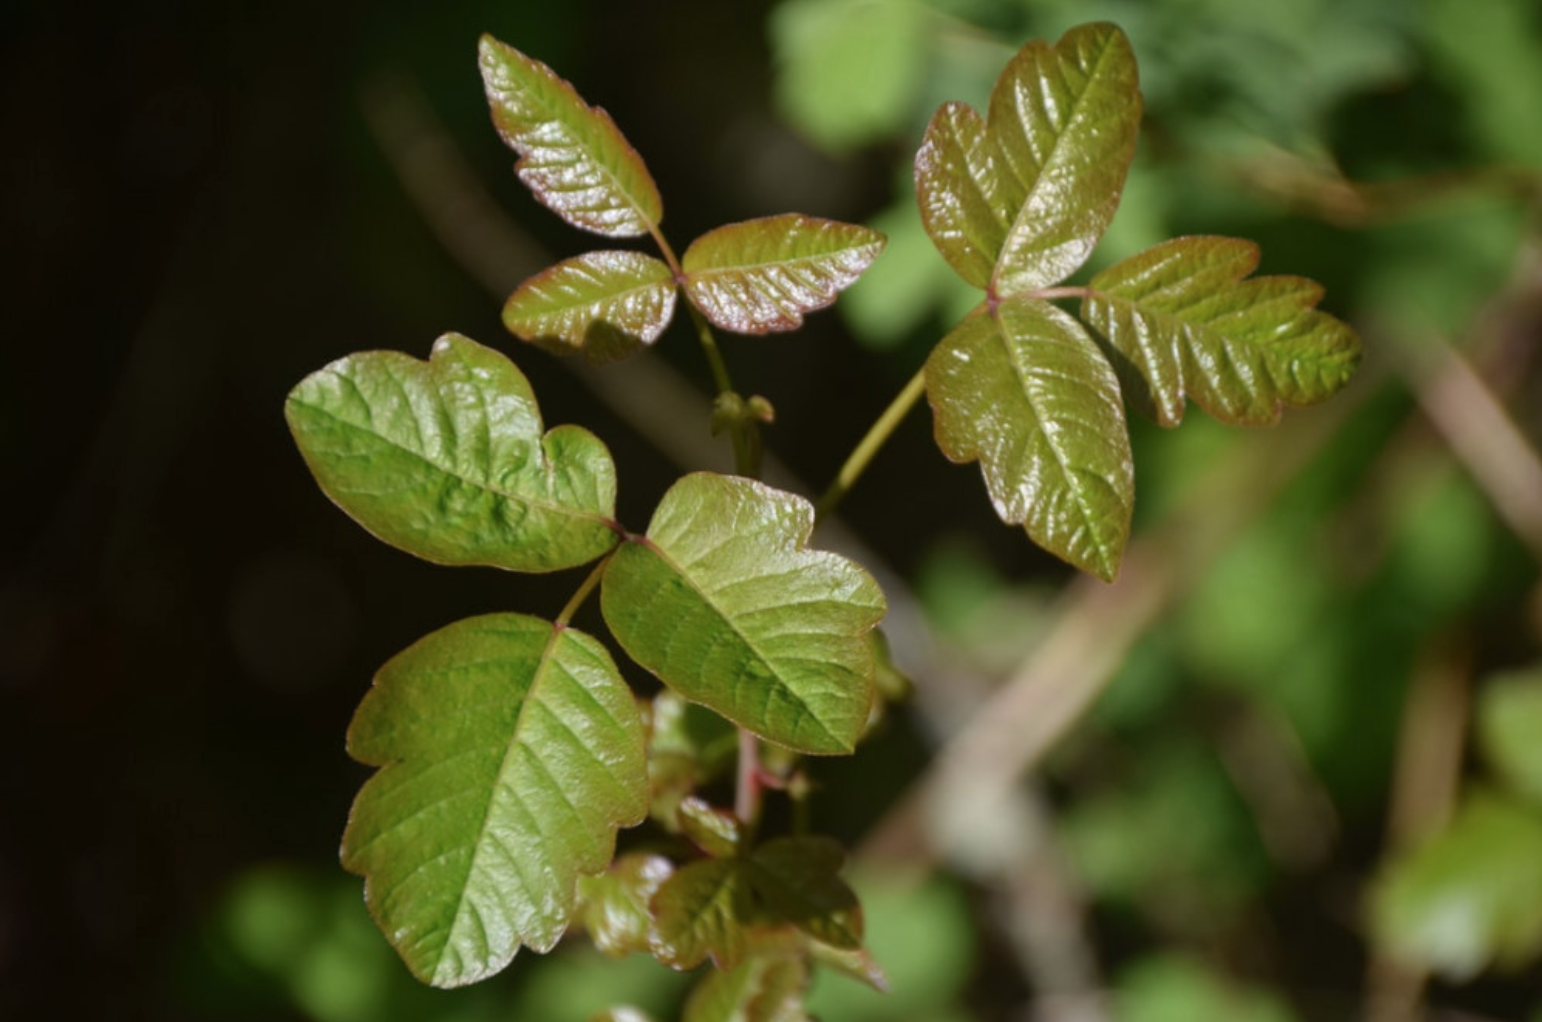 How to Kill Poison Ivy Without Killing Other Plants? - Poison ivy